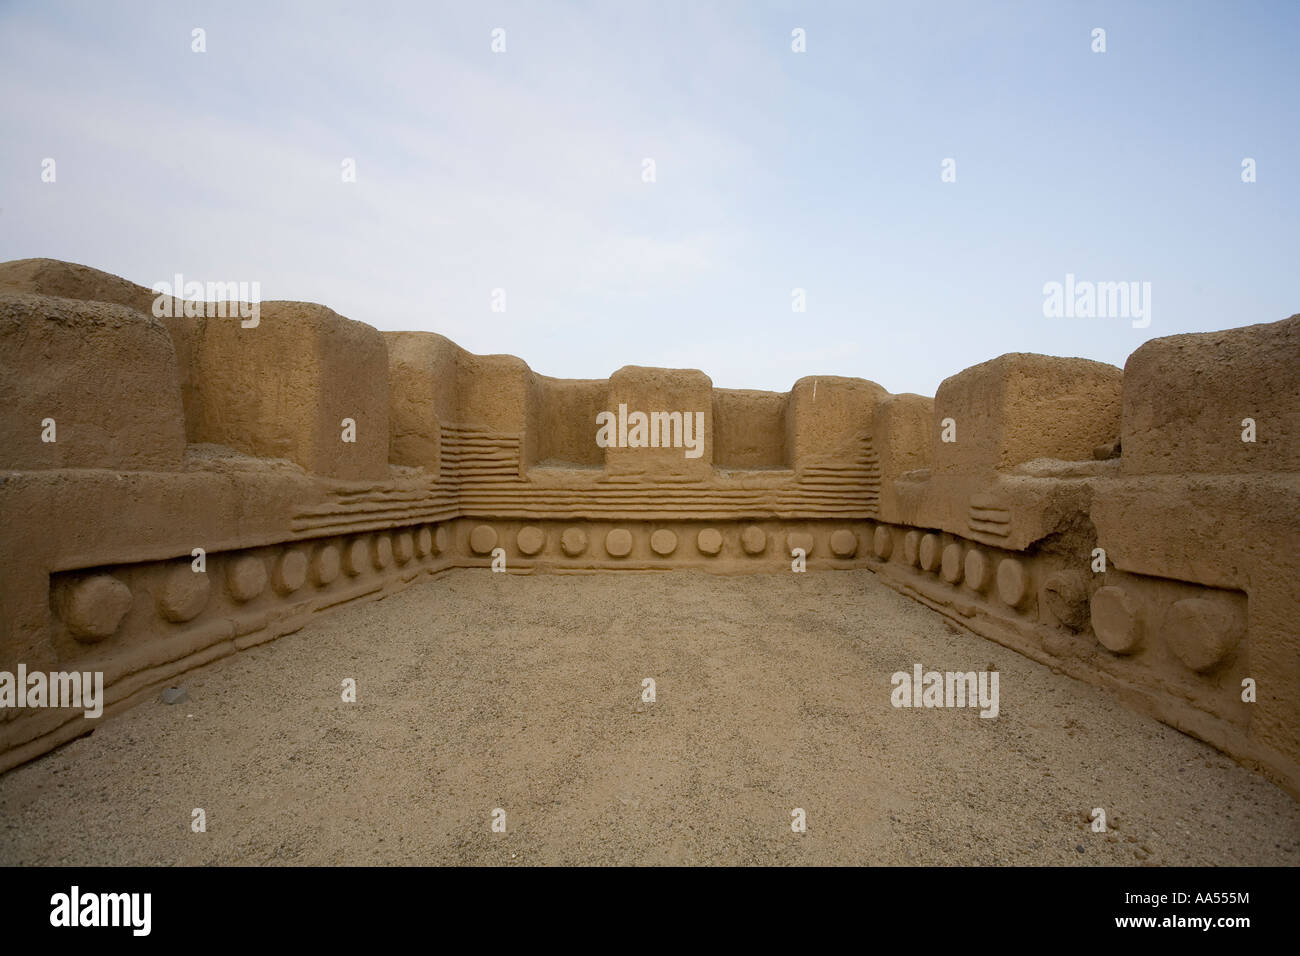 28 spots for the 28 days of the calendar month in the Chan Chan ruins,  Peru Stock Photo